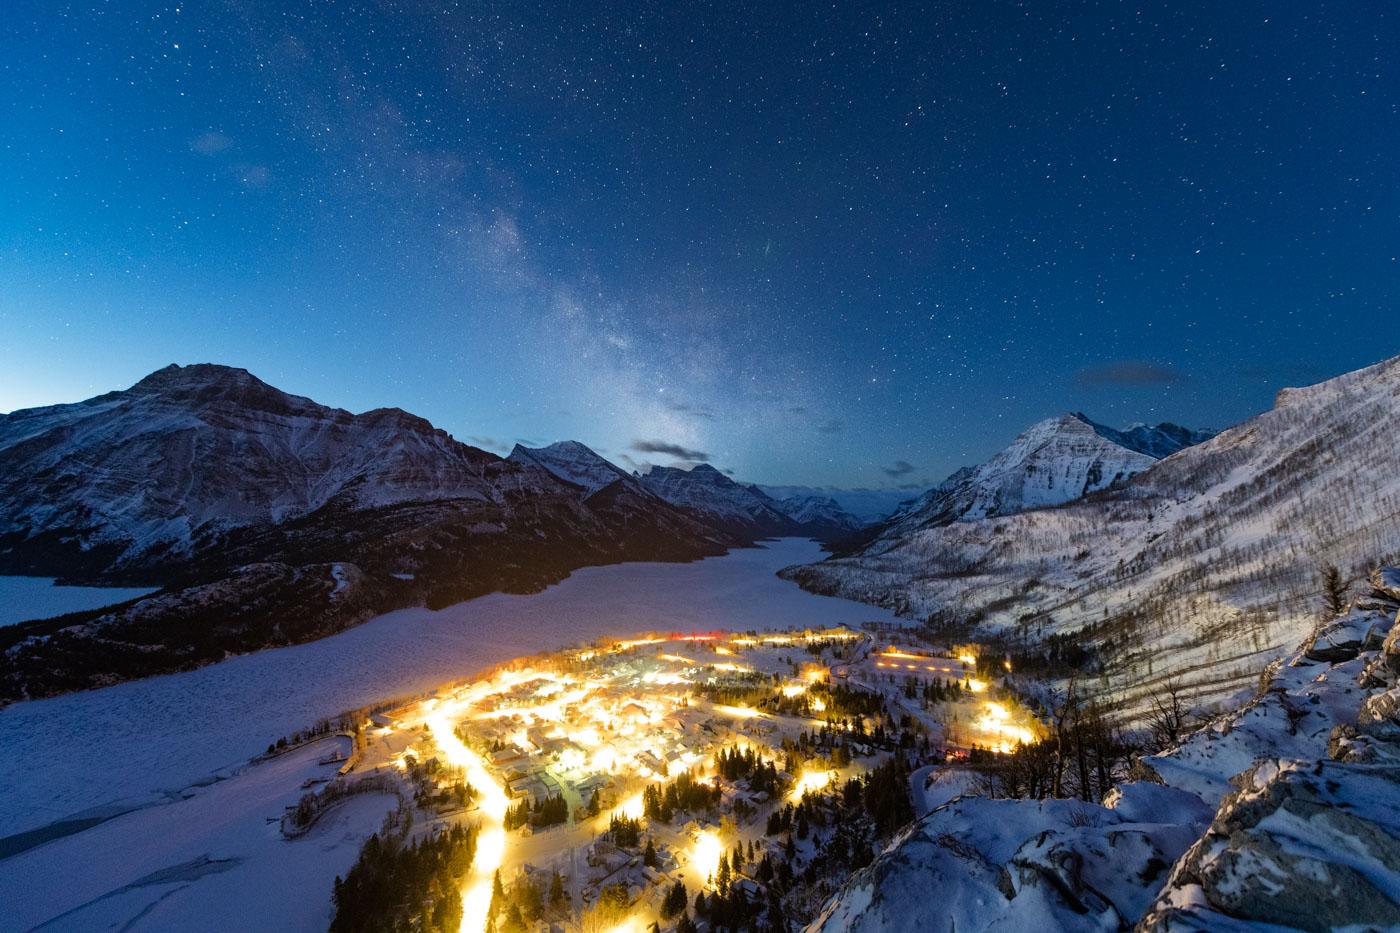 The Waterton Townsite at Night